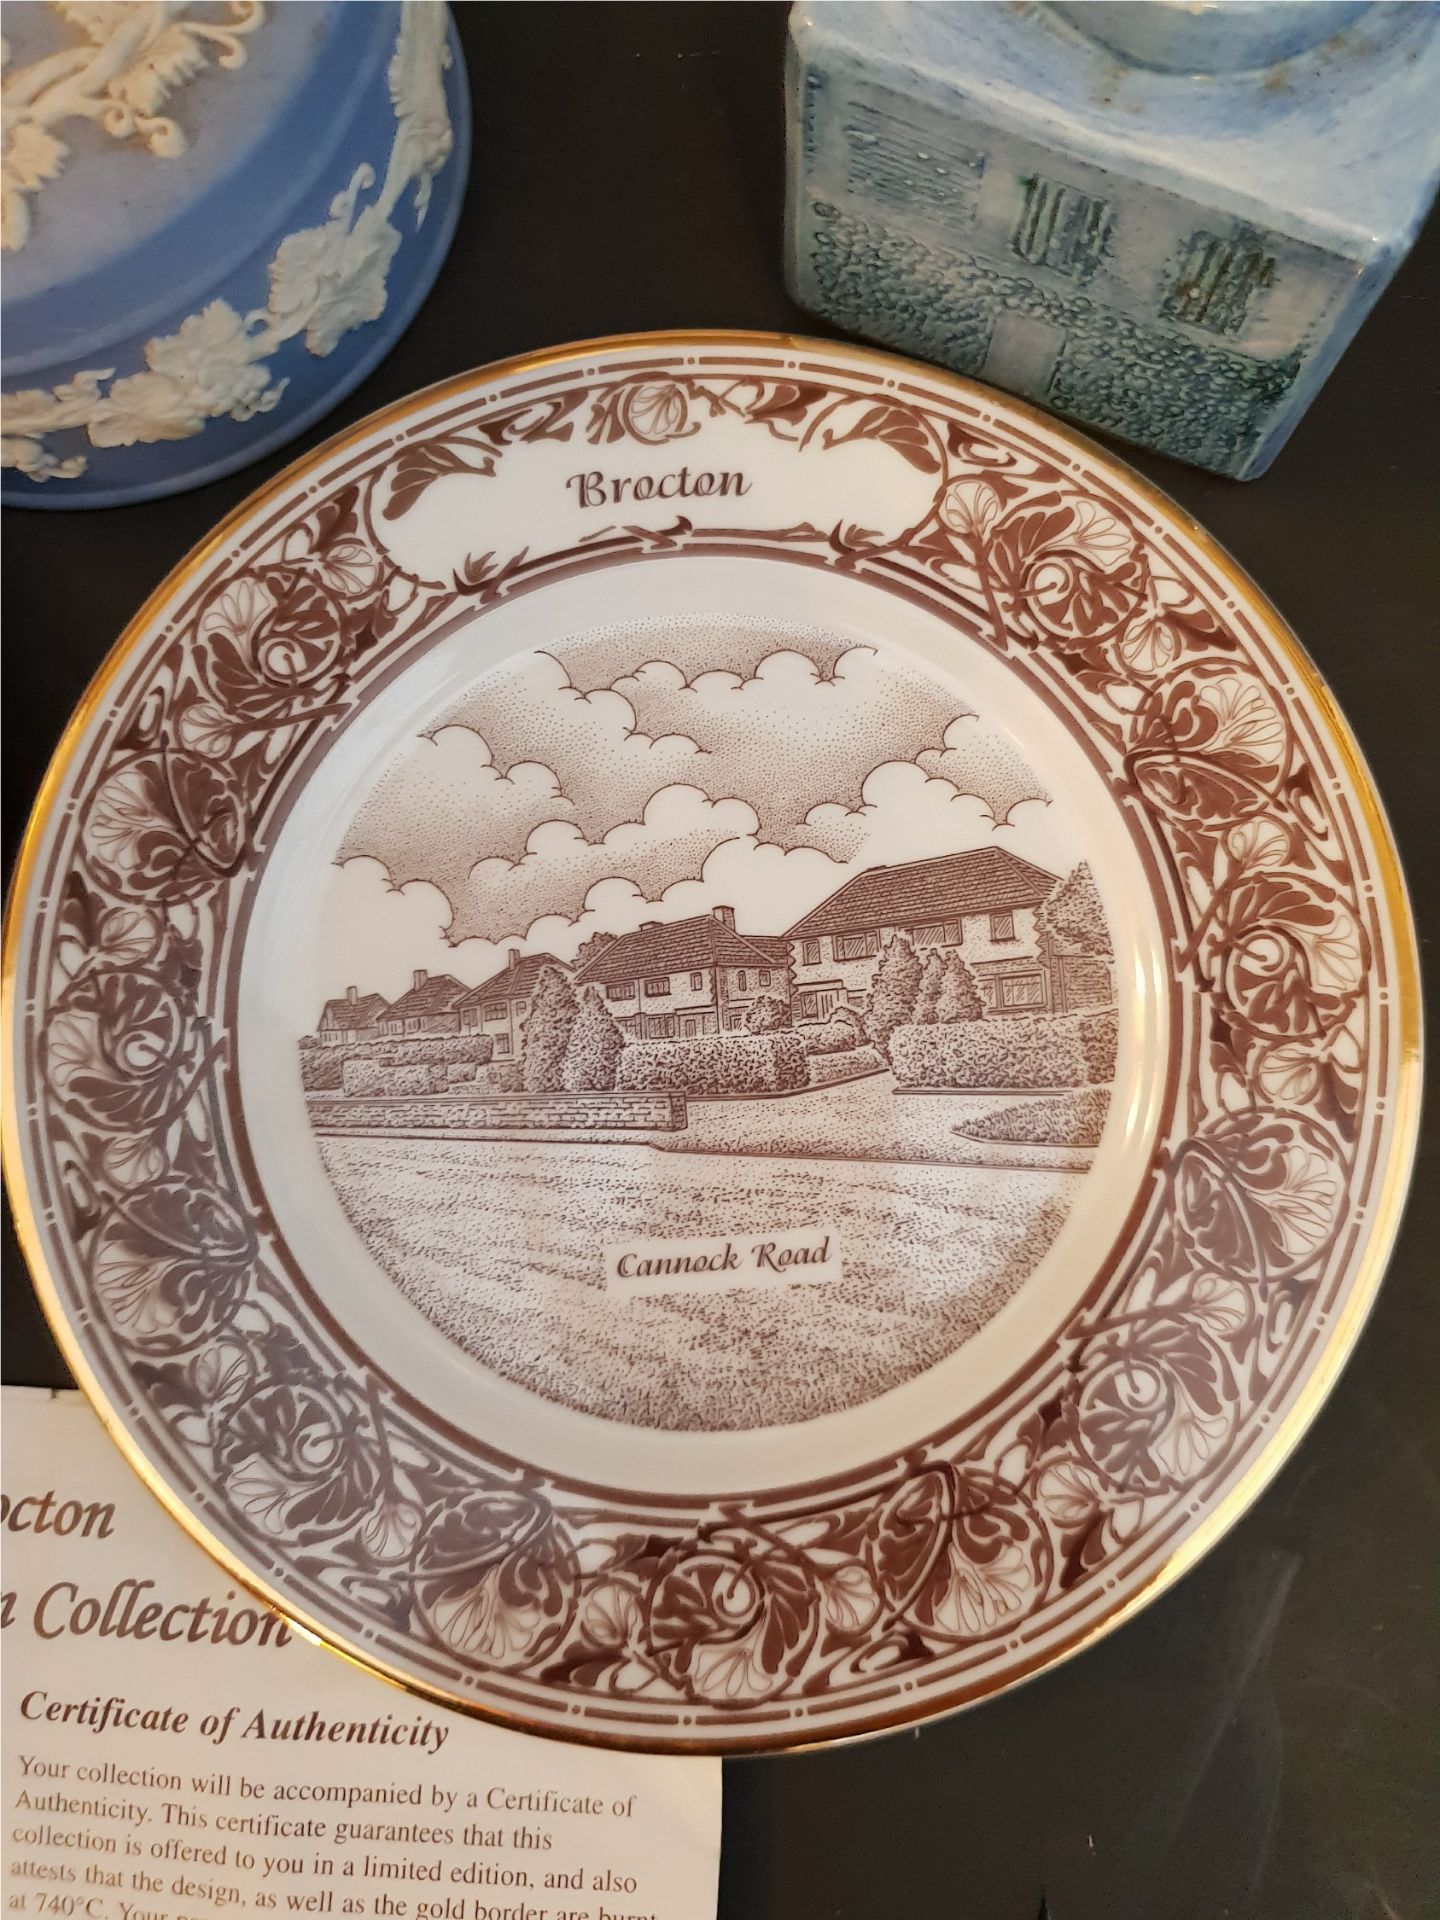 Vintage Parcel of 6 Collectors Plates for Brocton Staffordshire Plus Wedgwood & Studio Pottery. Each - Image 4 of 8